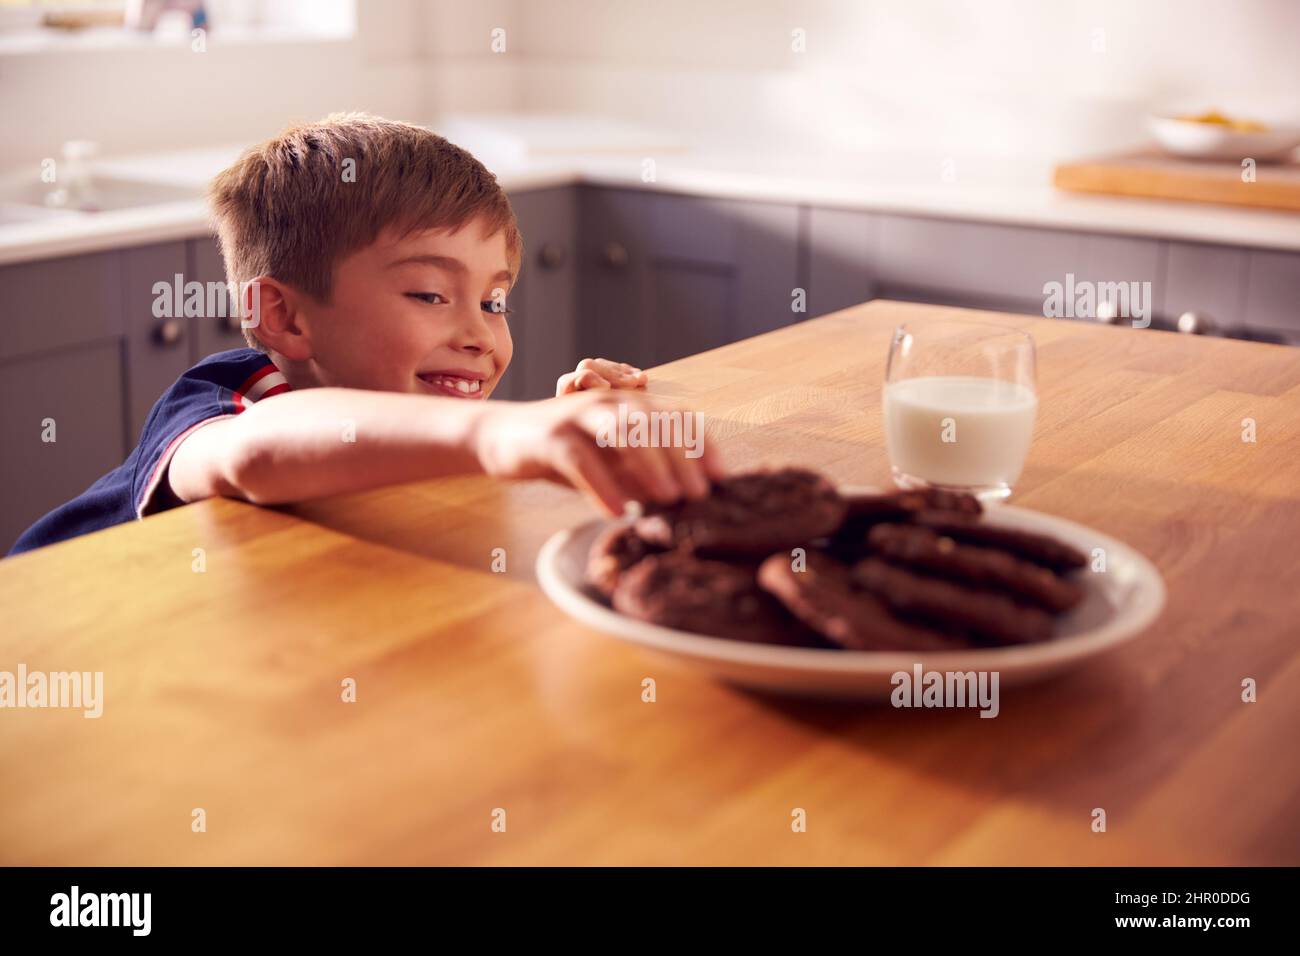 Boy At Home In Kitchen Reaching Up To Take Cookie From Plate On Counter Stock Photo